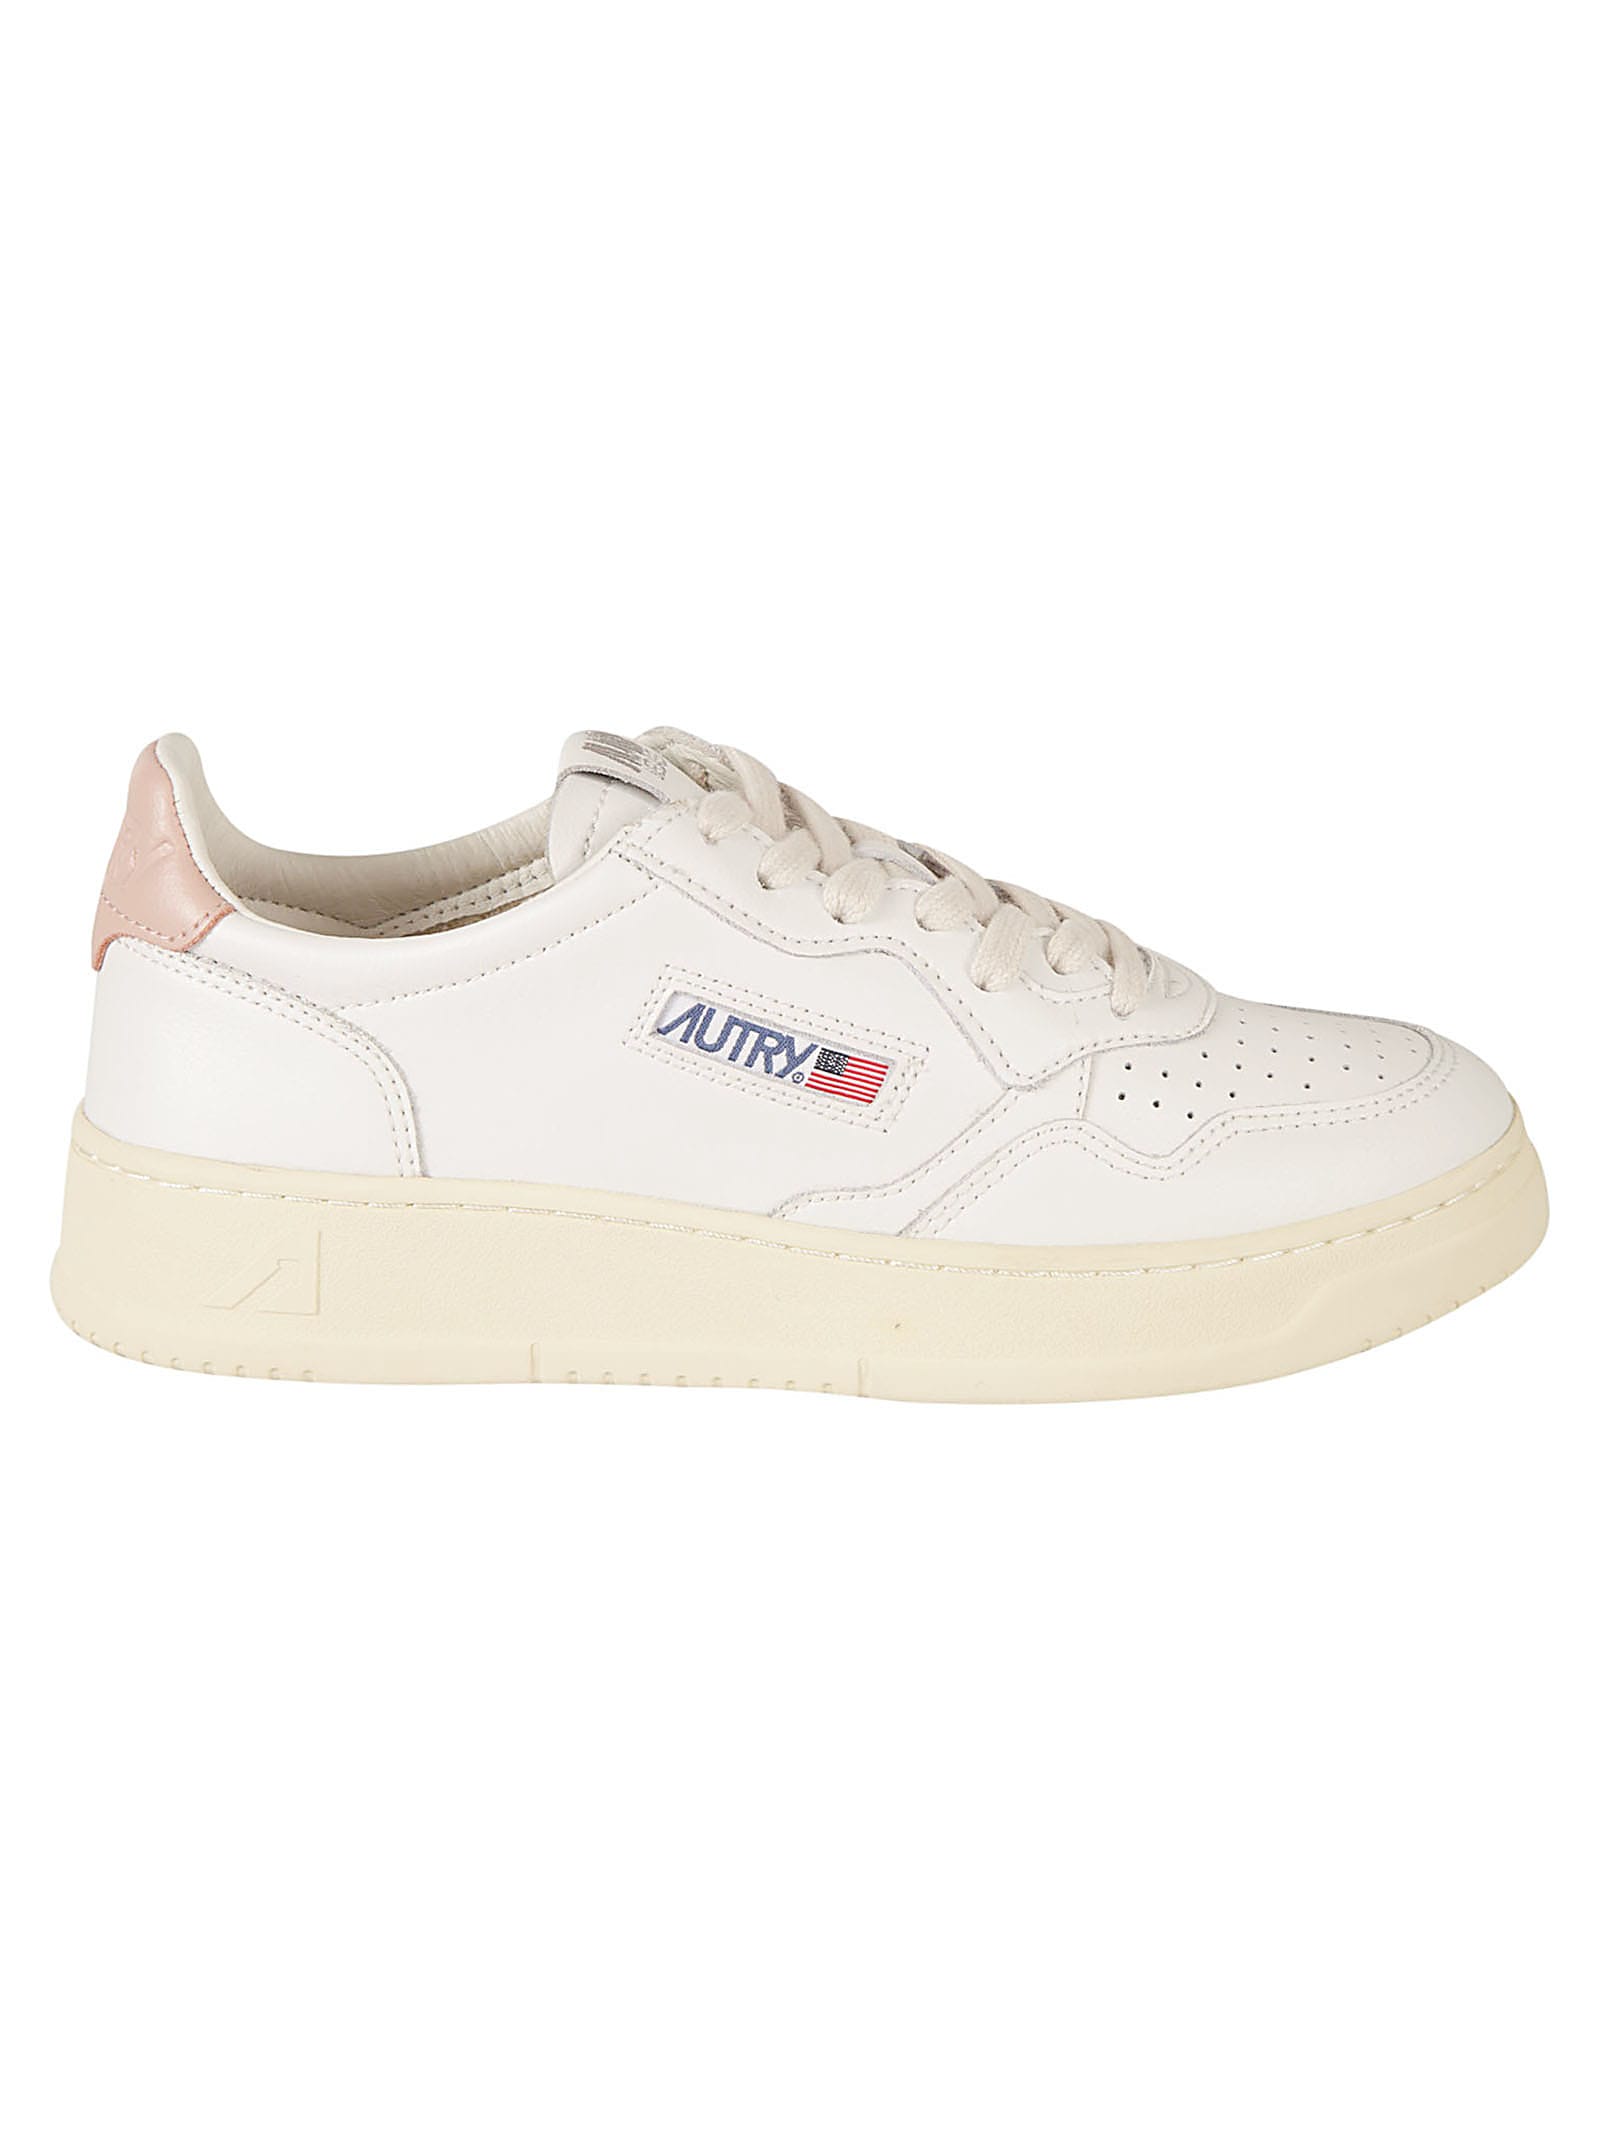 Shop Autry Medalist Low Sneakers In White/pink